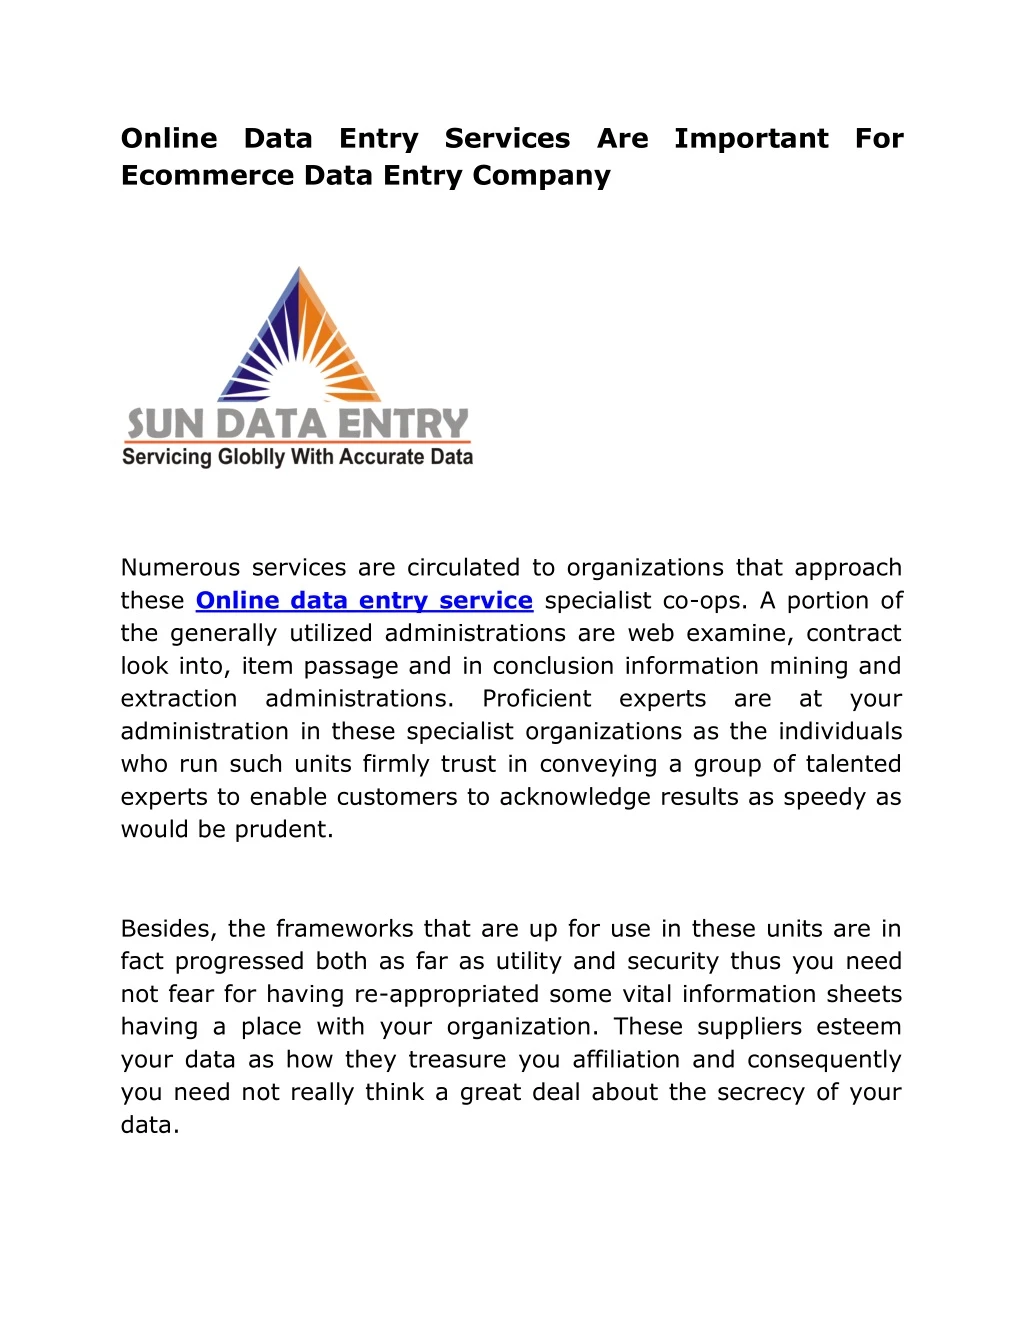 online data entry services are important